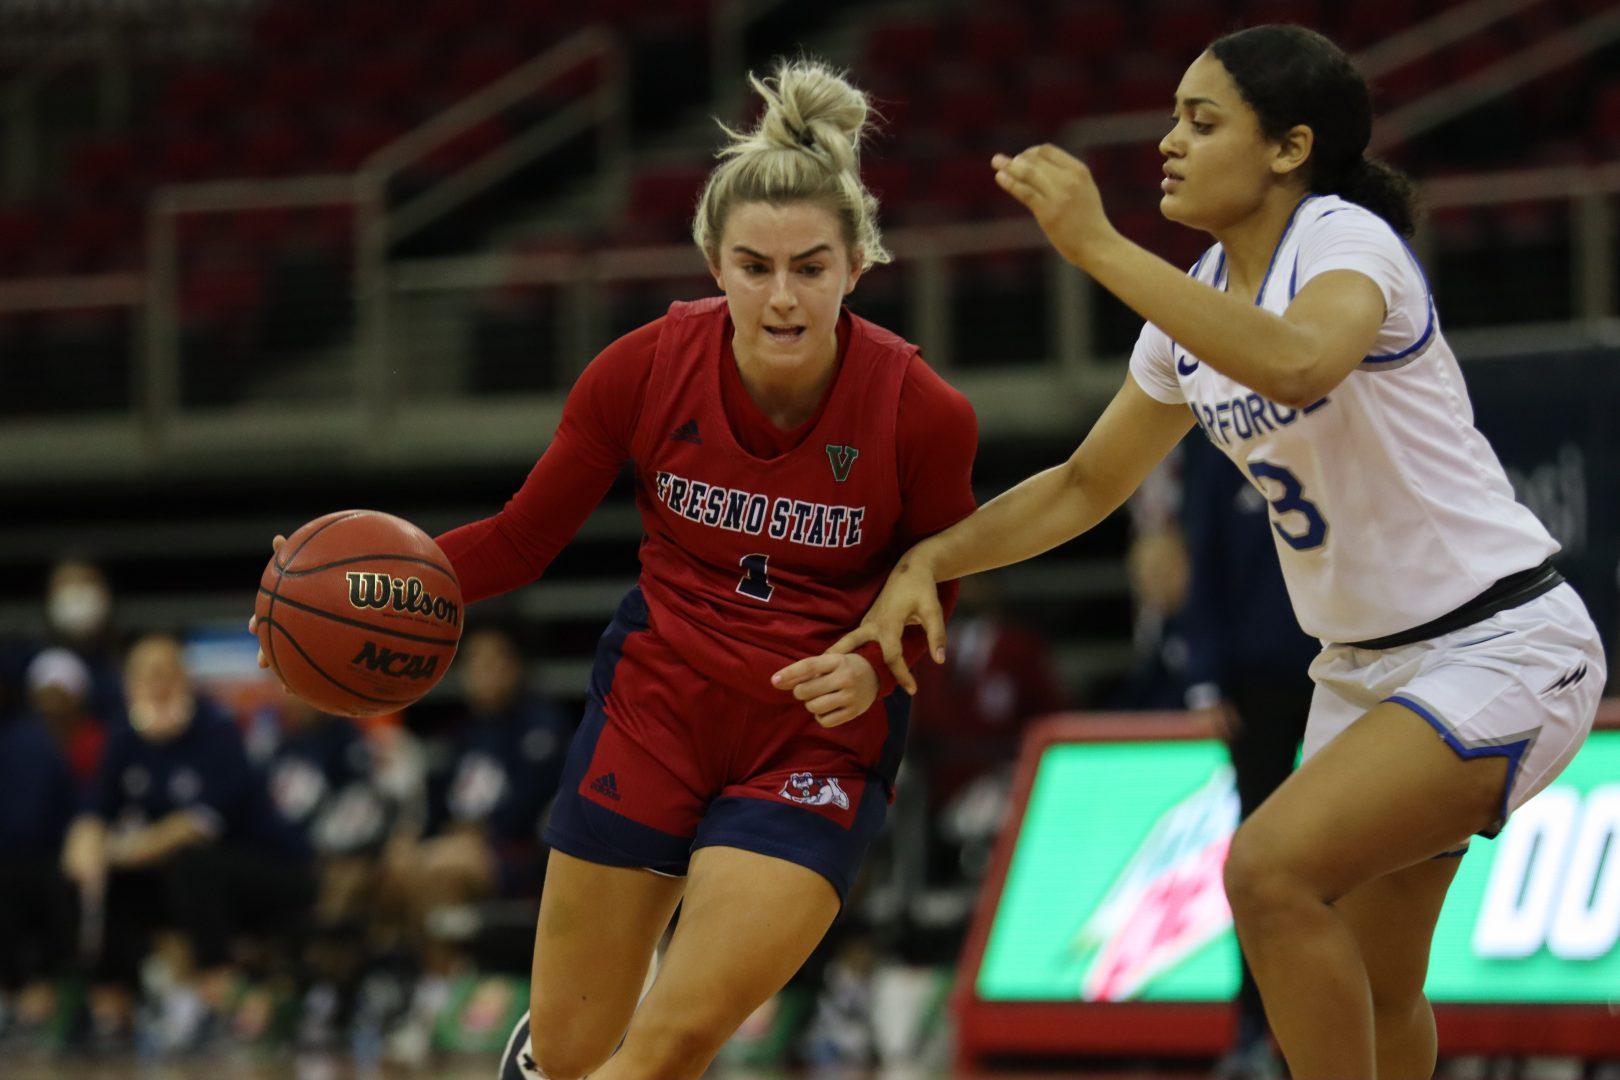 Fresno+State+guard+Haley+Cavinder+%281%29+drives+the+ball+to+the+basket+in+the+first+half+of++the+game+against+Air+Force+on+Feb.+11%2C+2021%2C+at+the+Save+Mart+Center.+%28Kameron+Thorn+%2F+The+Collegian%29